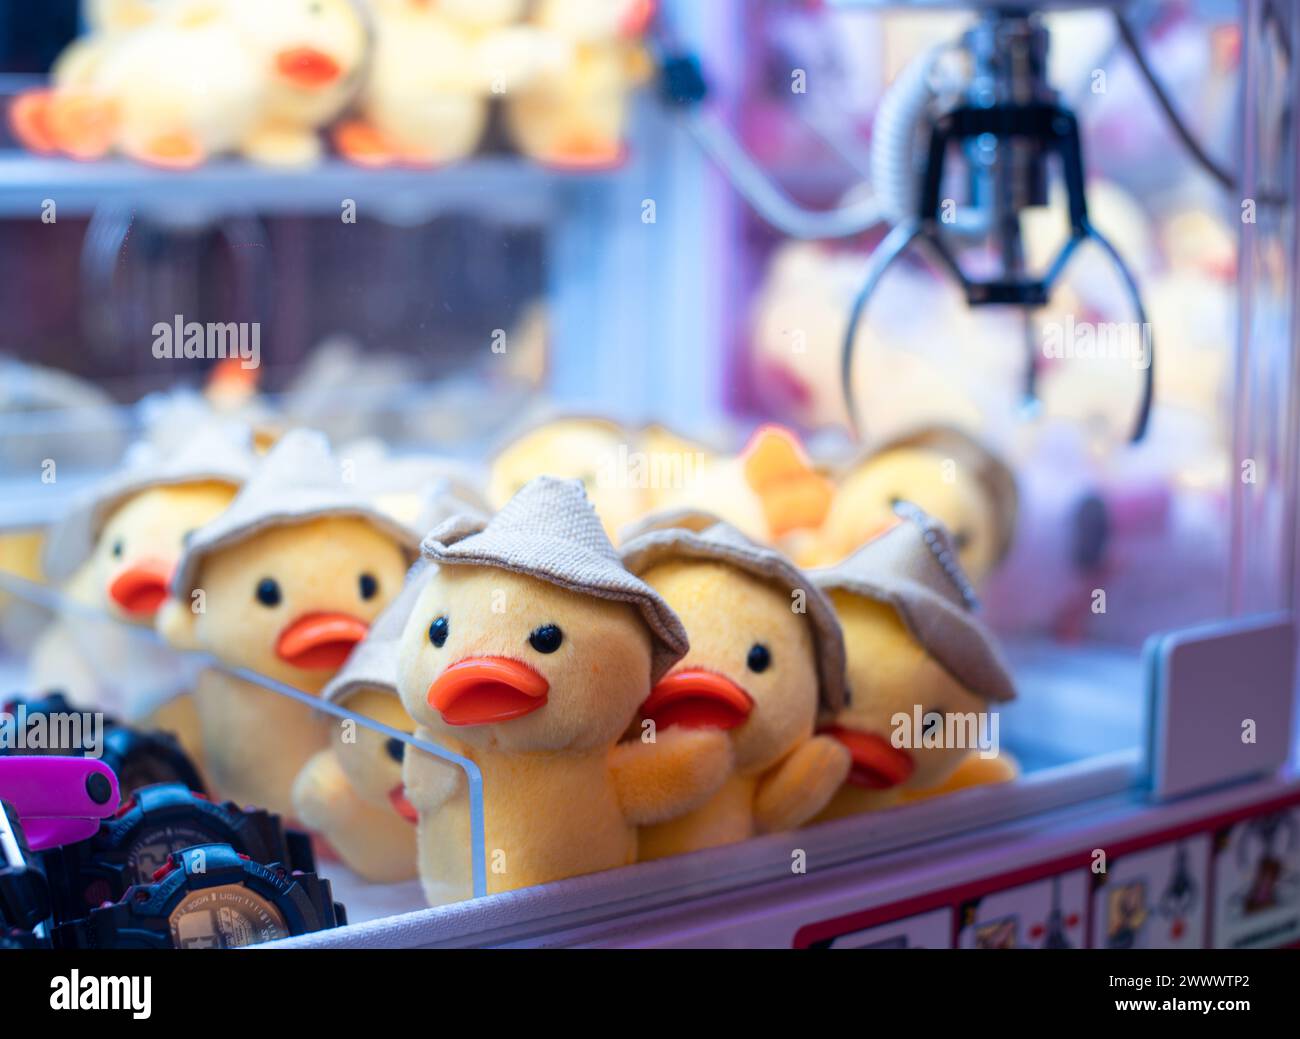 The duck plush toys in a claw machine arcade game. Stock Photo